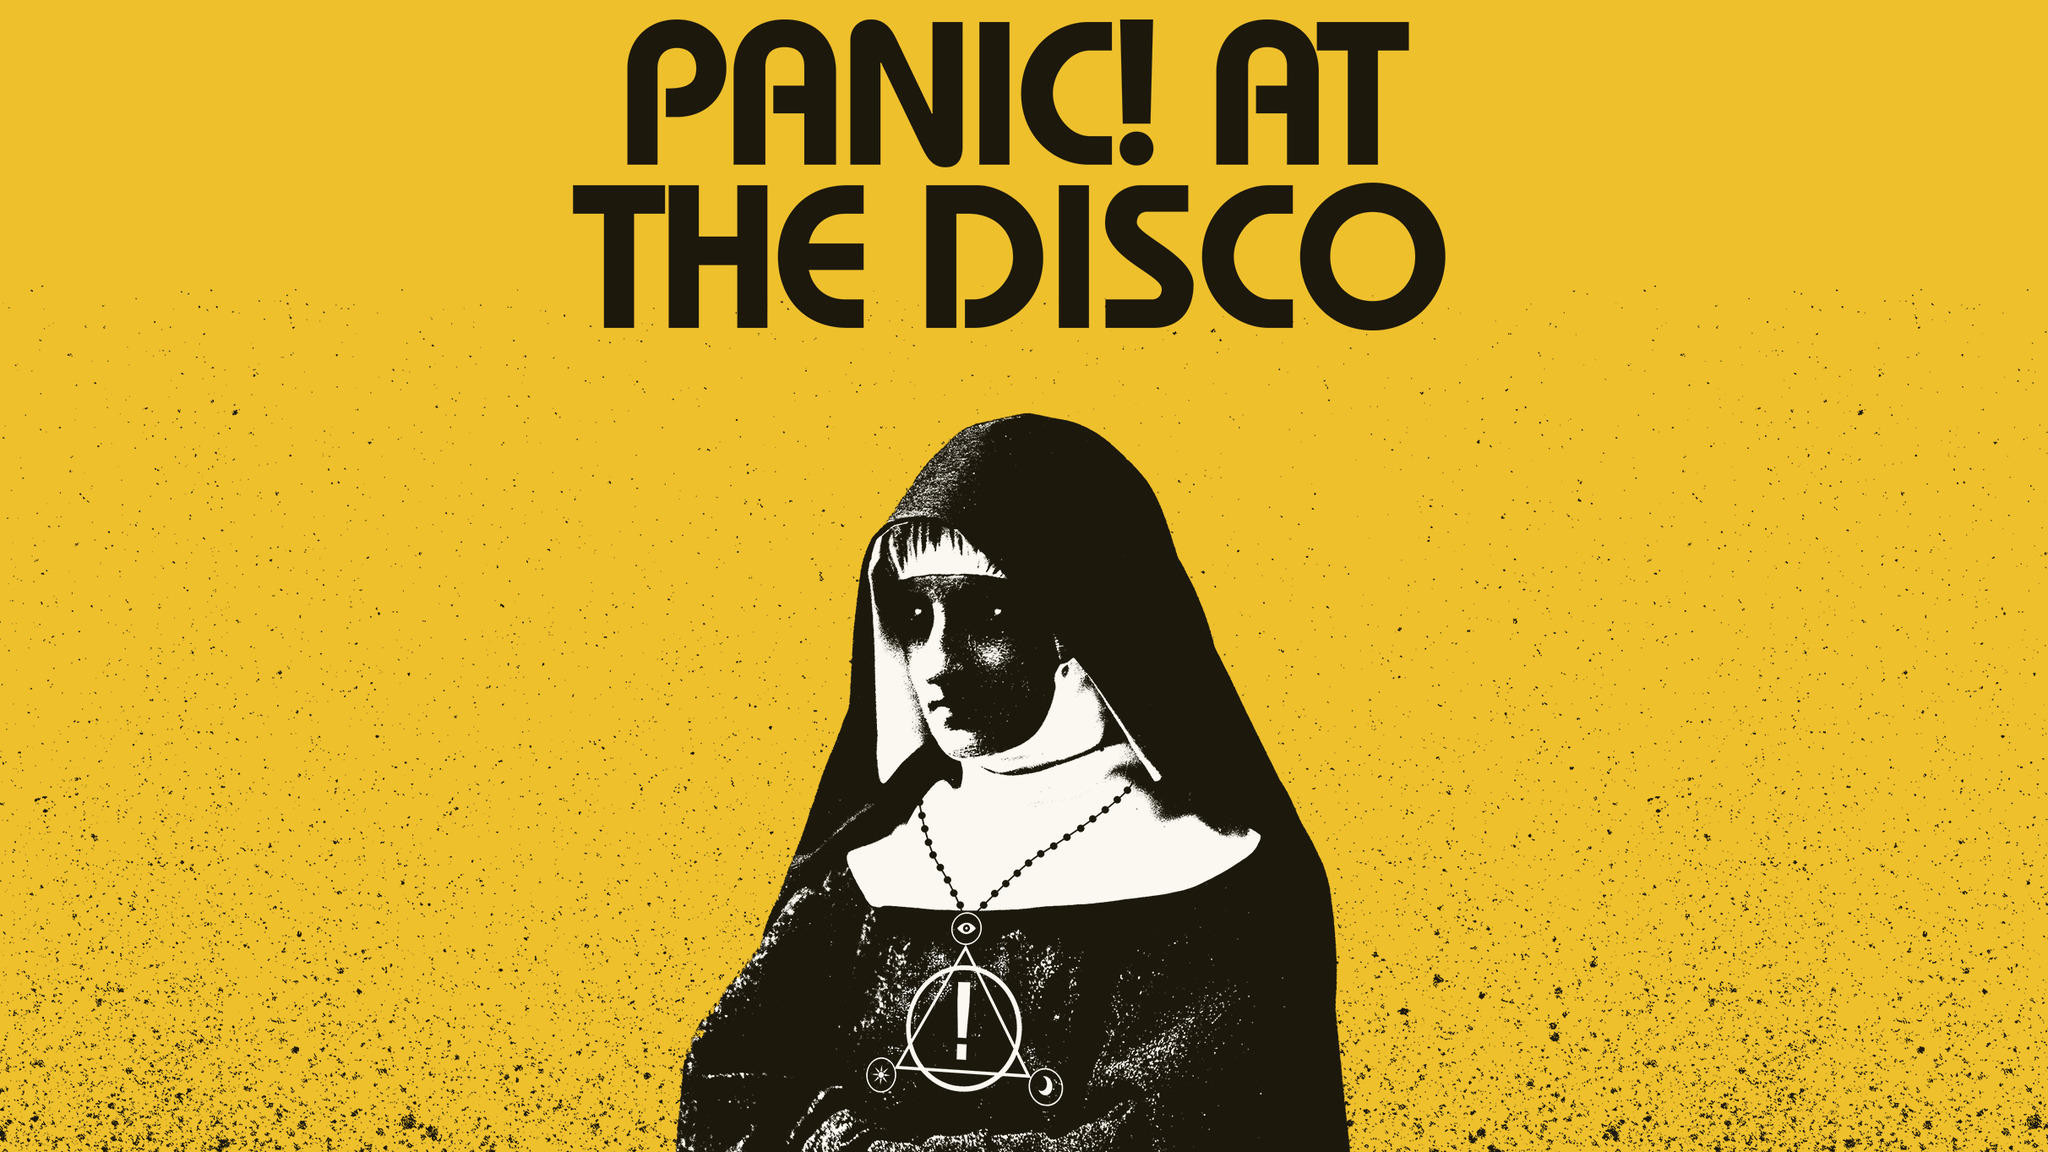 panic at the disco full discography download torrent